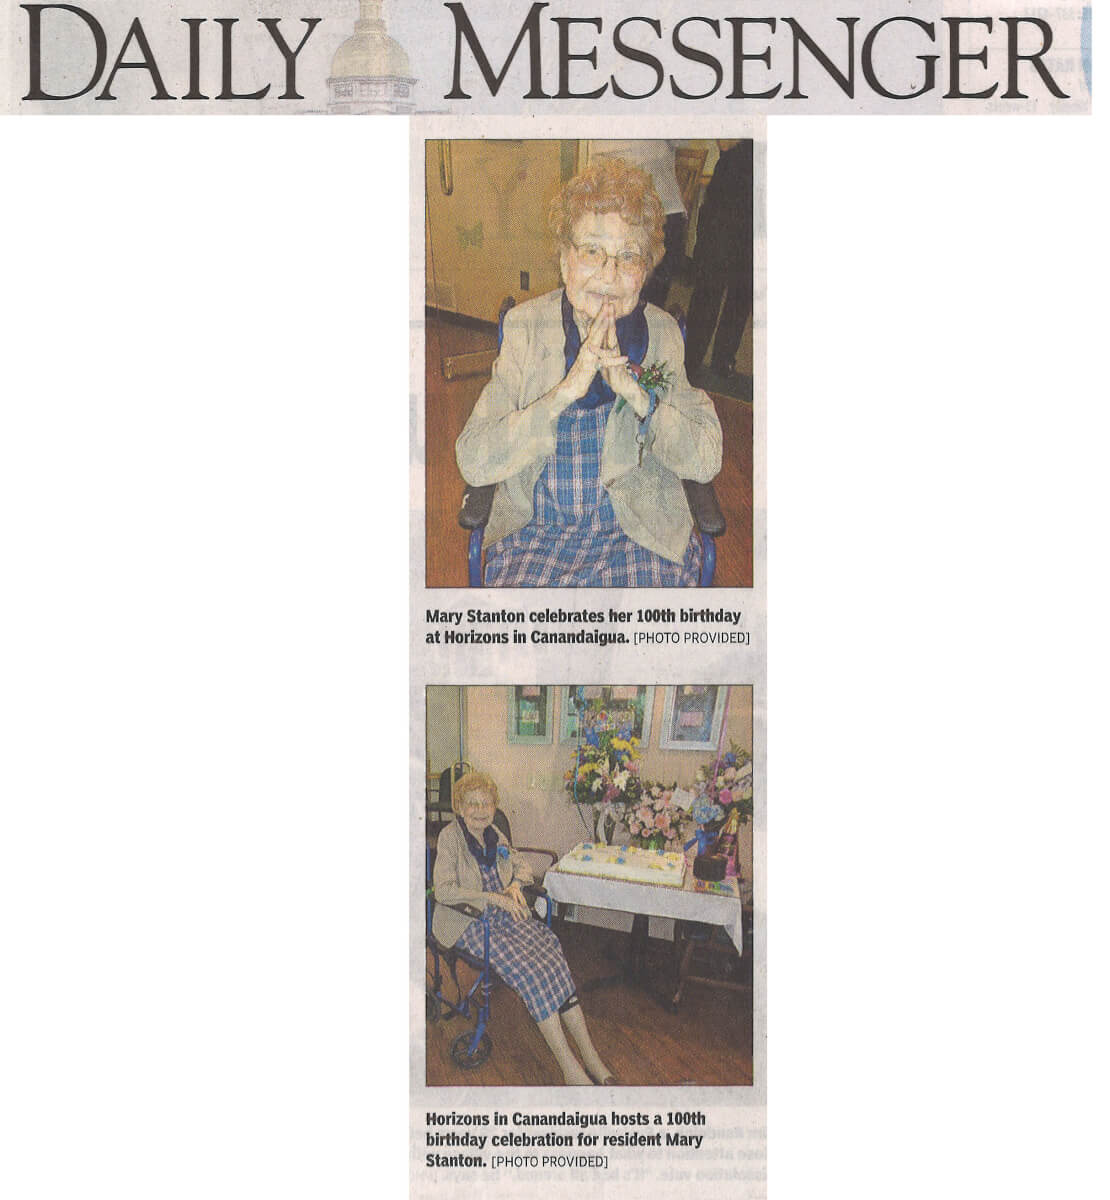 Horizons' Assisted Living Resident Mary Stanton celebrates her 100th birthday, photos in the Daily Messenger 2017